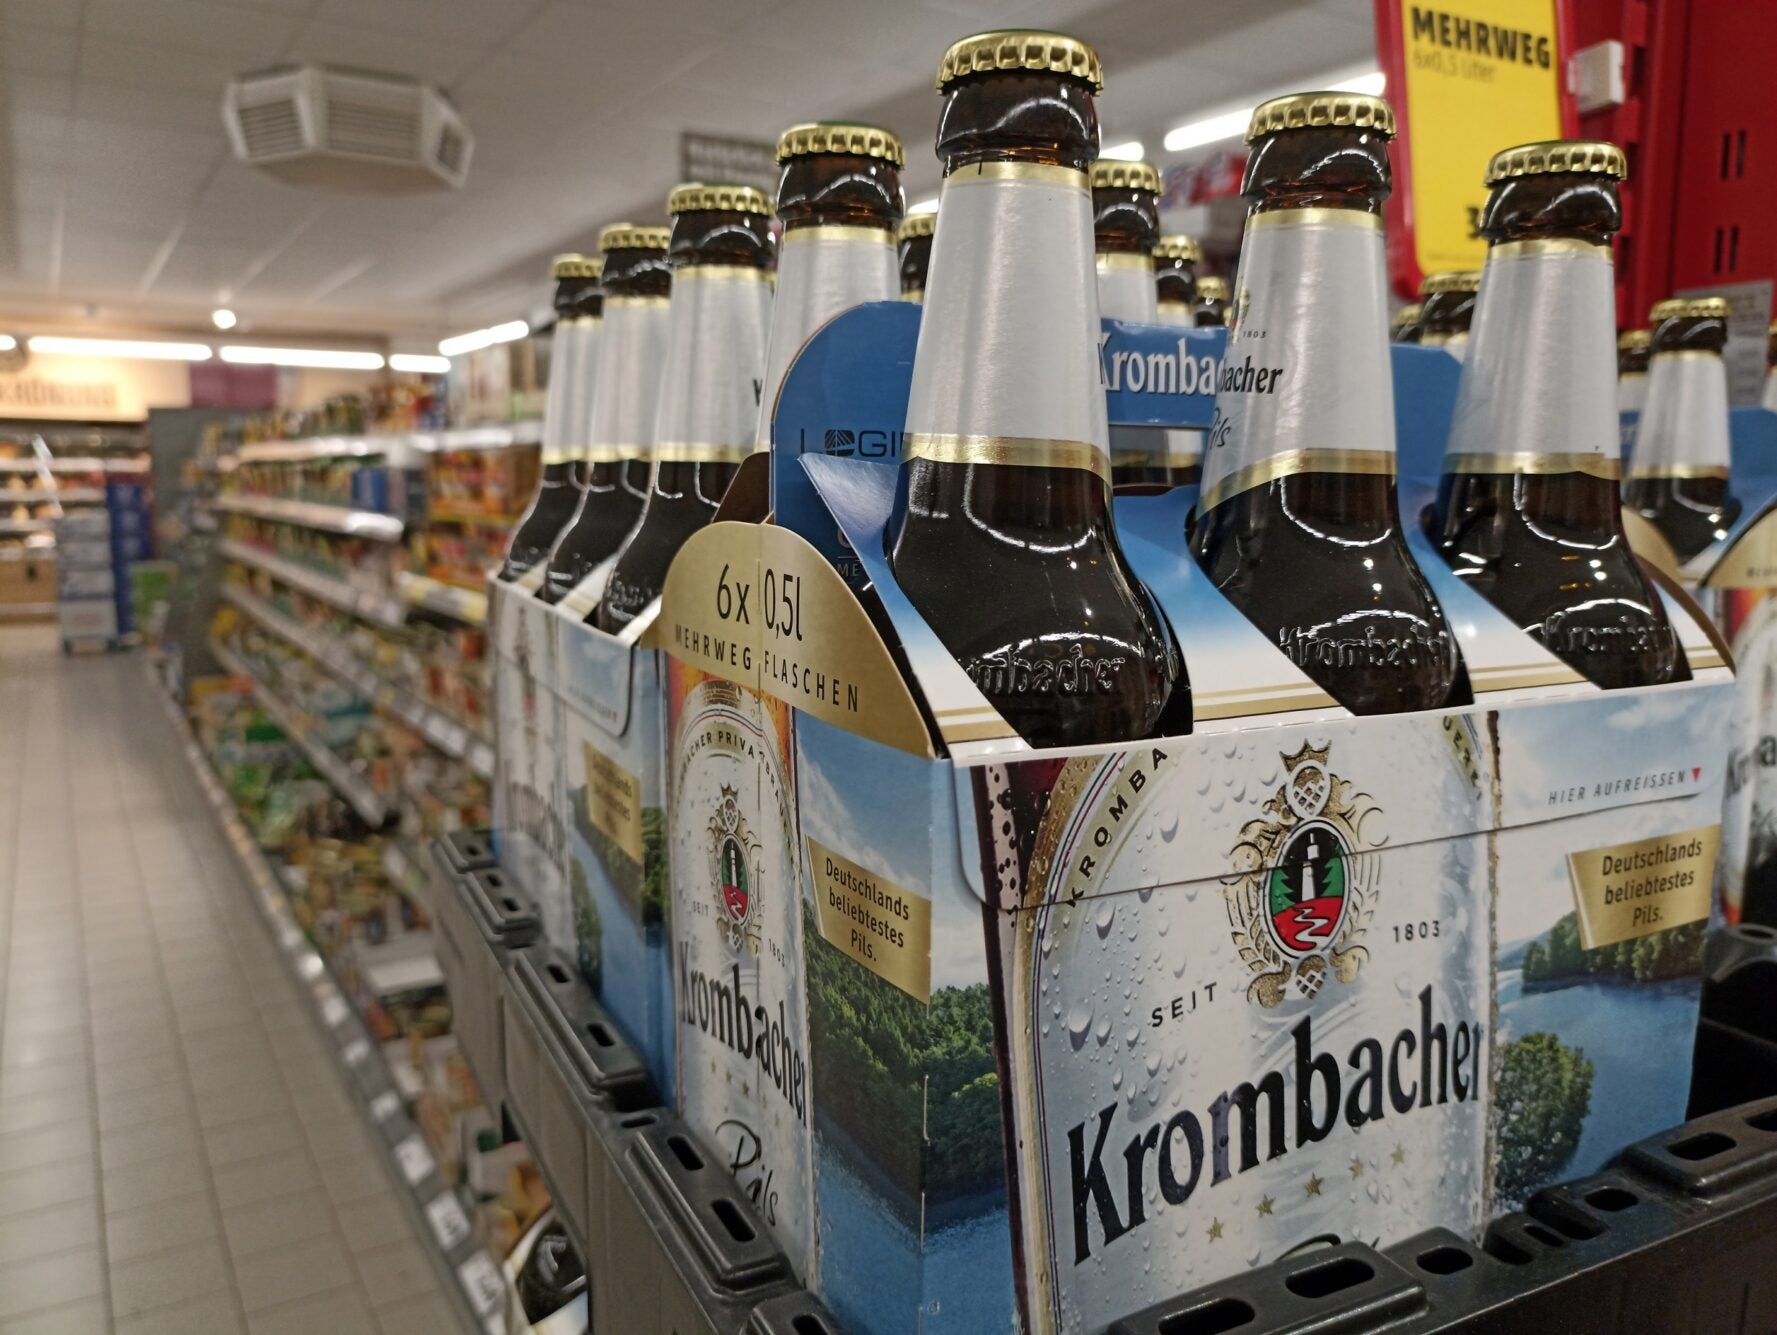 How energy crisis and inflation hitting Germany's beer market